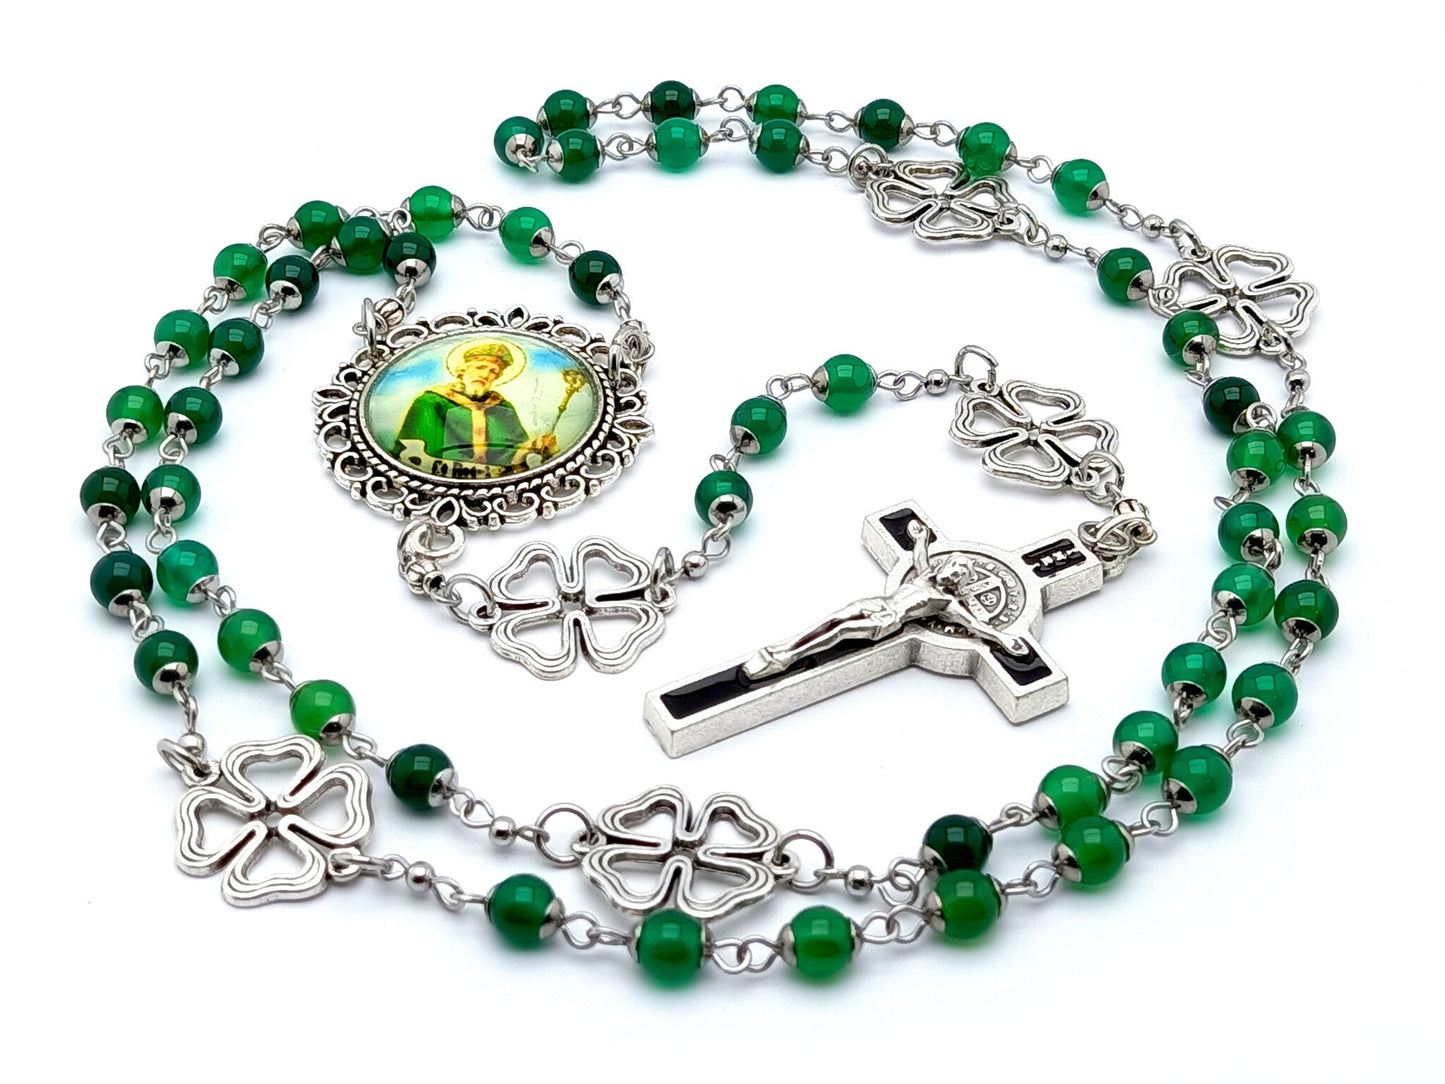 Saint Patrick unique rosary beads with green agate and silver shamrock beads, silver and black enamel crucifix and picture centre medal.